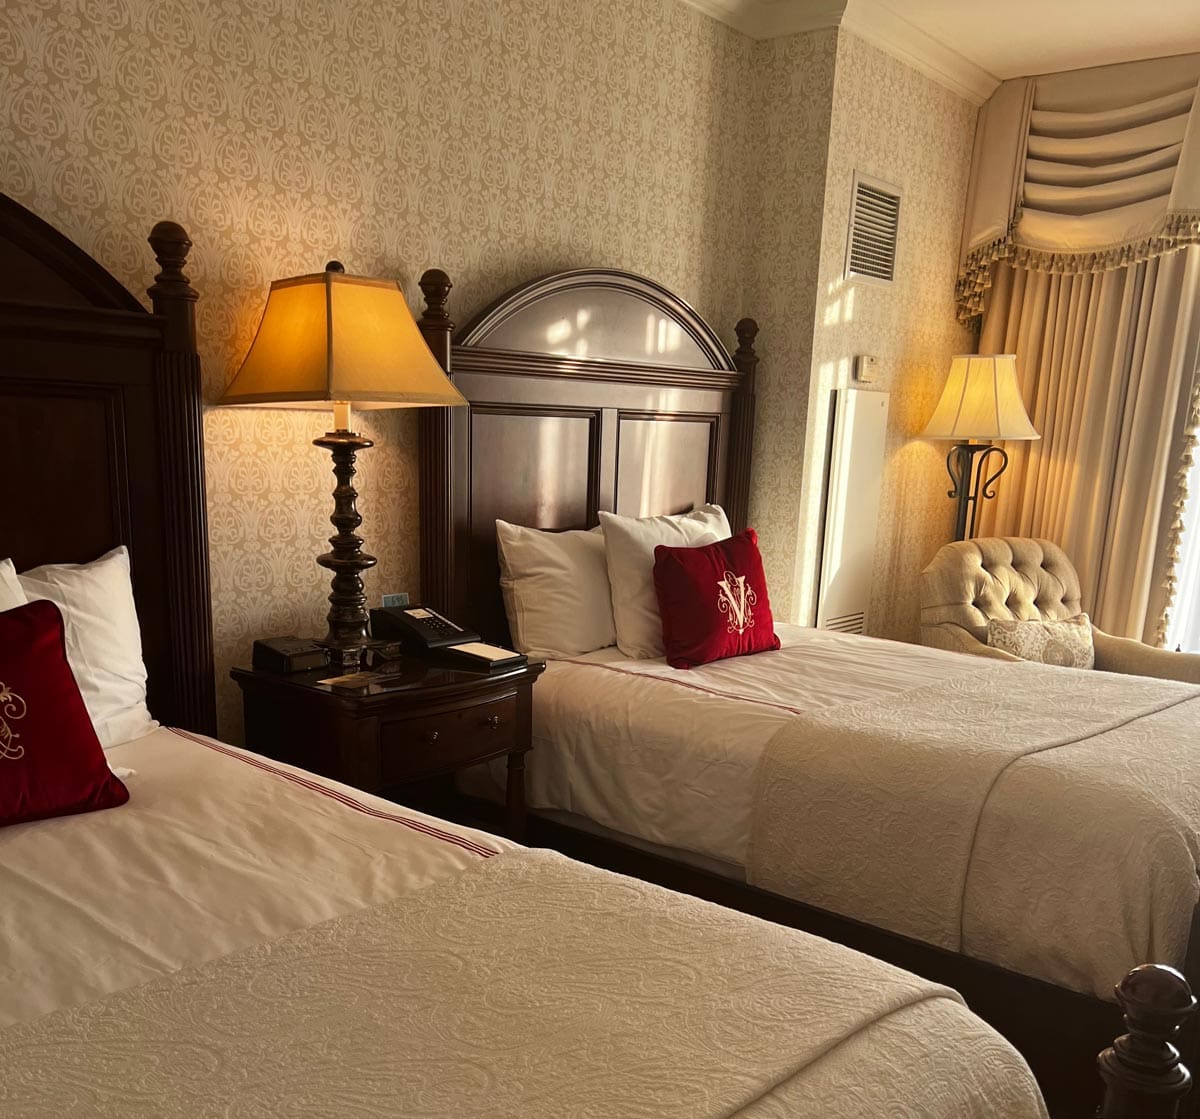 Inside the one of the guest rooms with two double beds at the Inn at Biltmore.